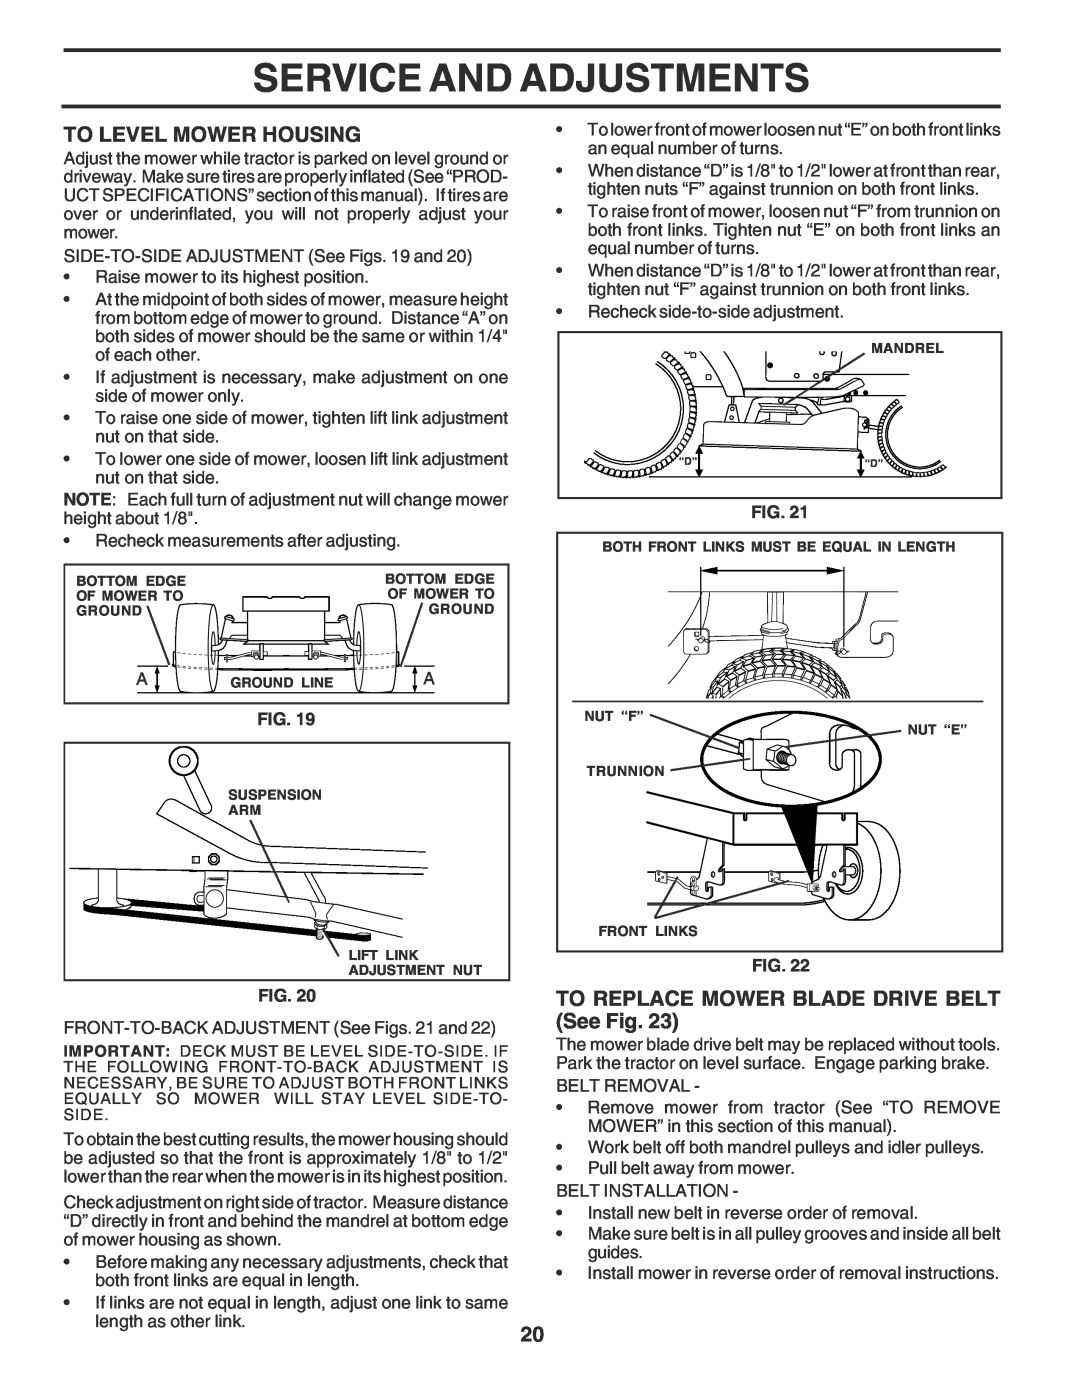 Poulan PR1742STF owner manual To Level Mower Housing, TO REPLACE MOWER BLADE DRIVE BELT See Fig, Service And Adjustments 